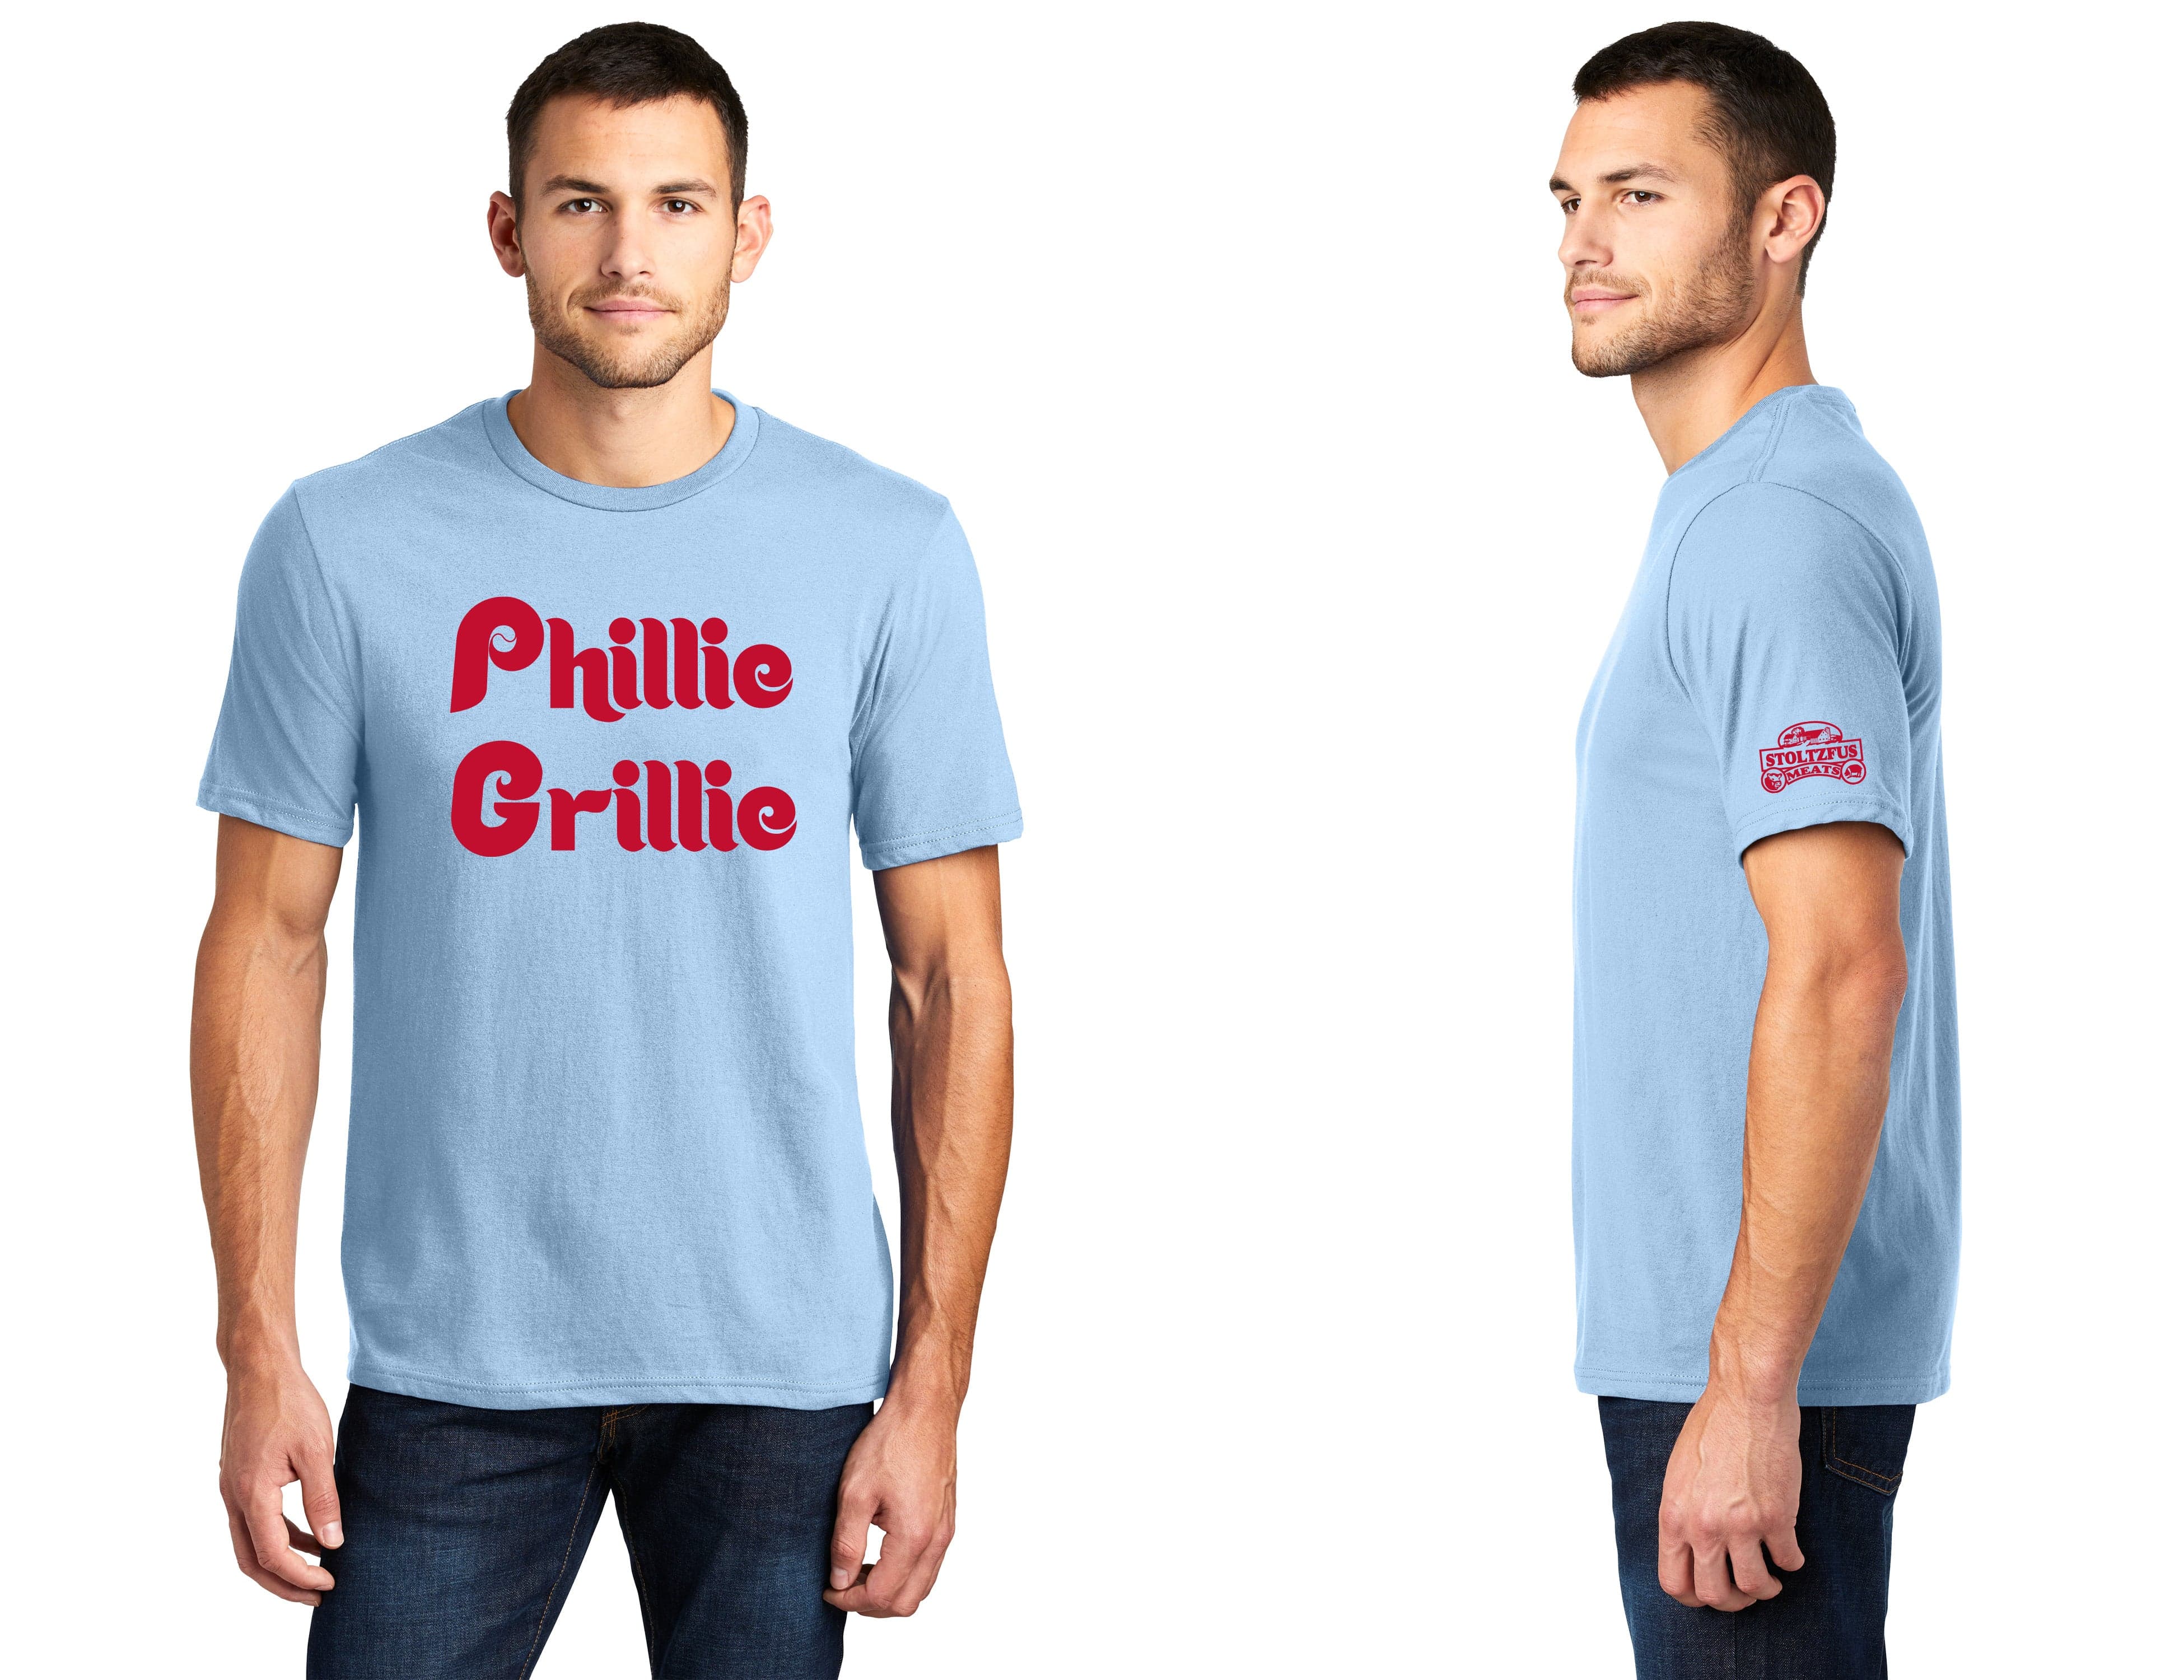 Philly Sports Shirts Ring The Bell Shirt Red / Medium